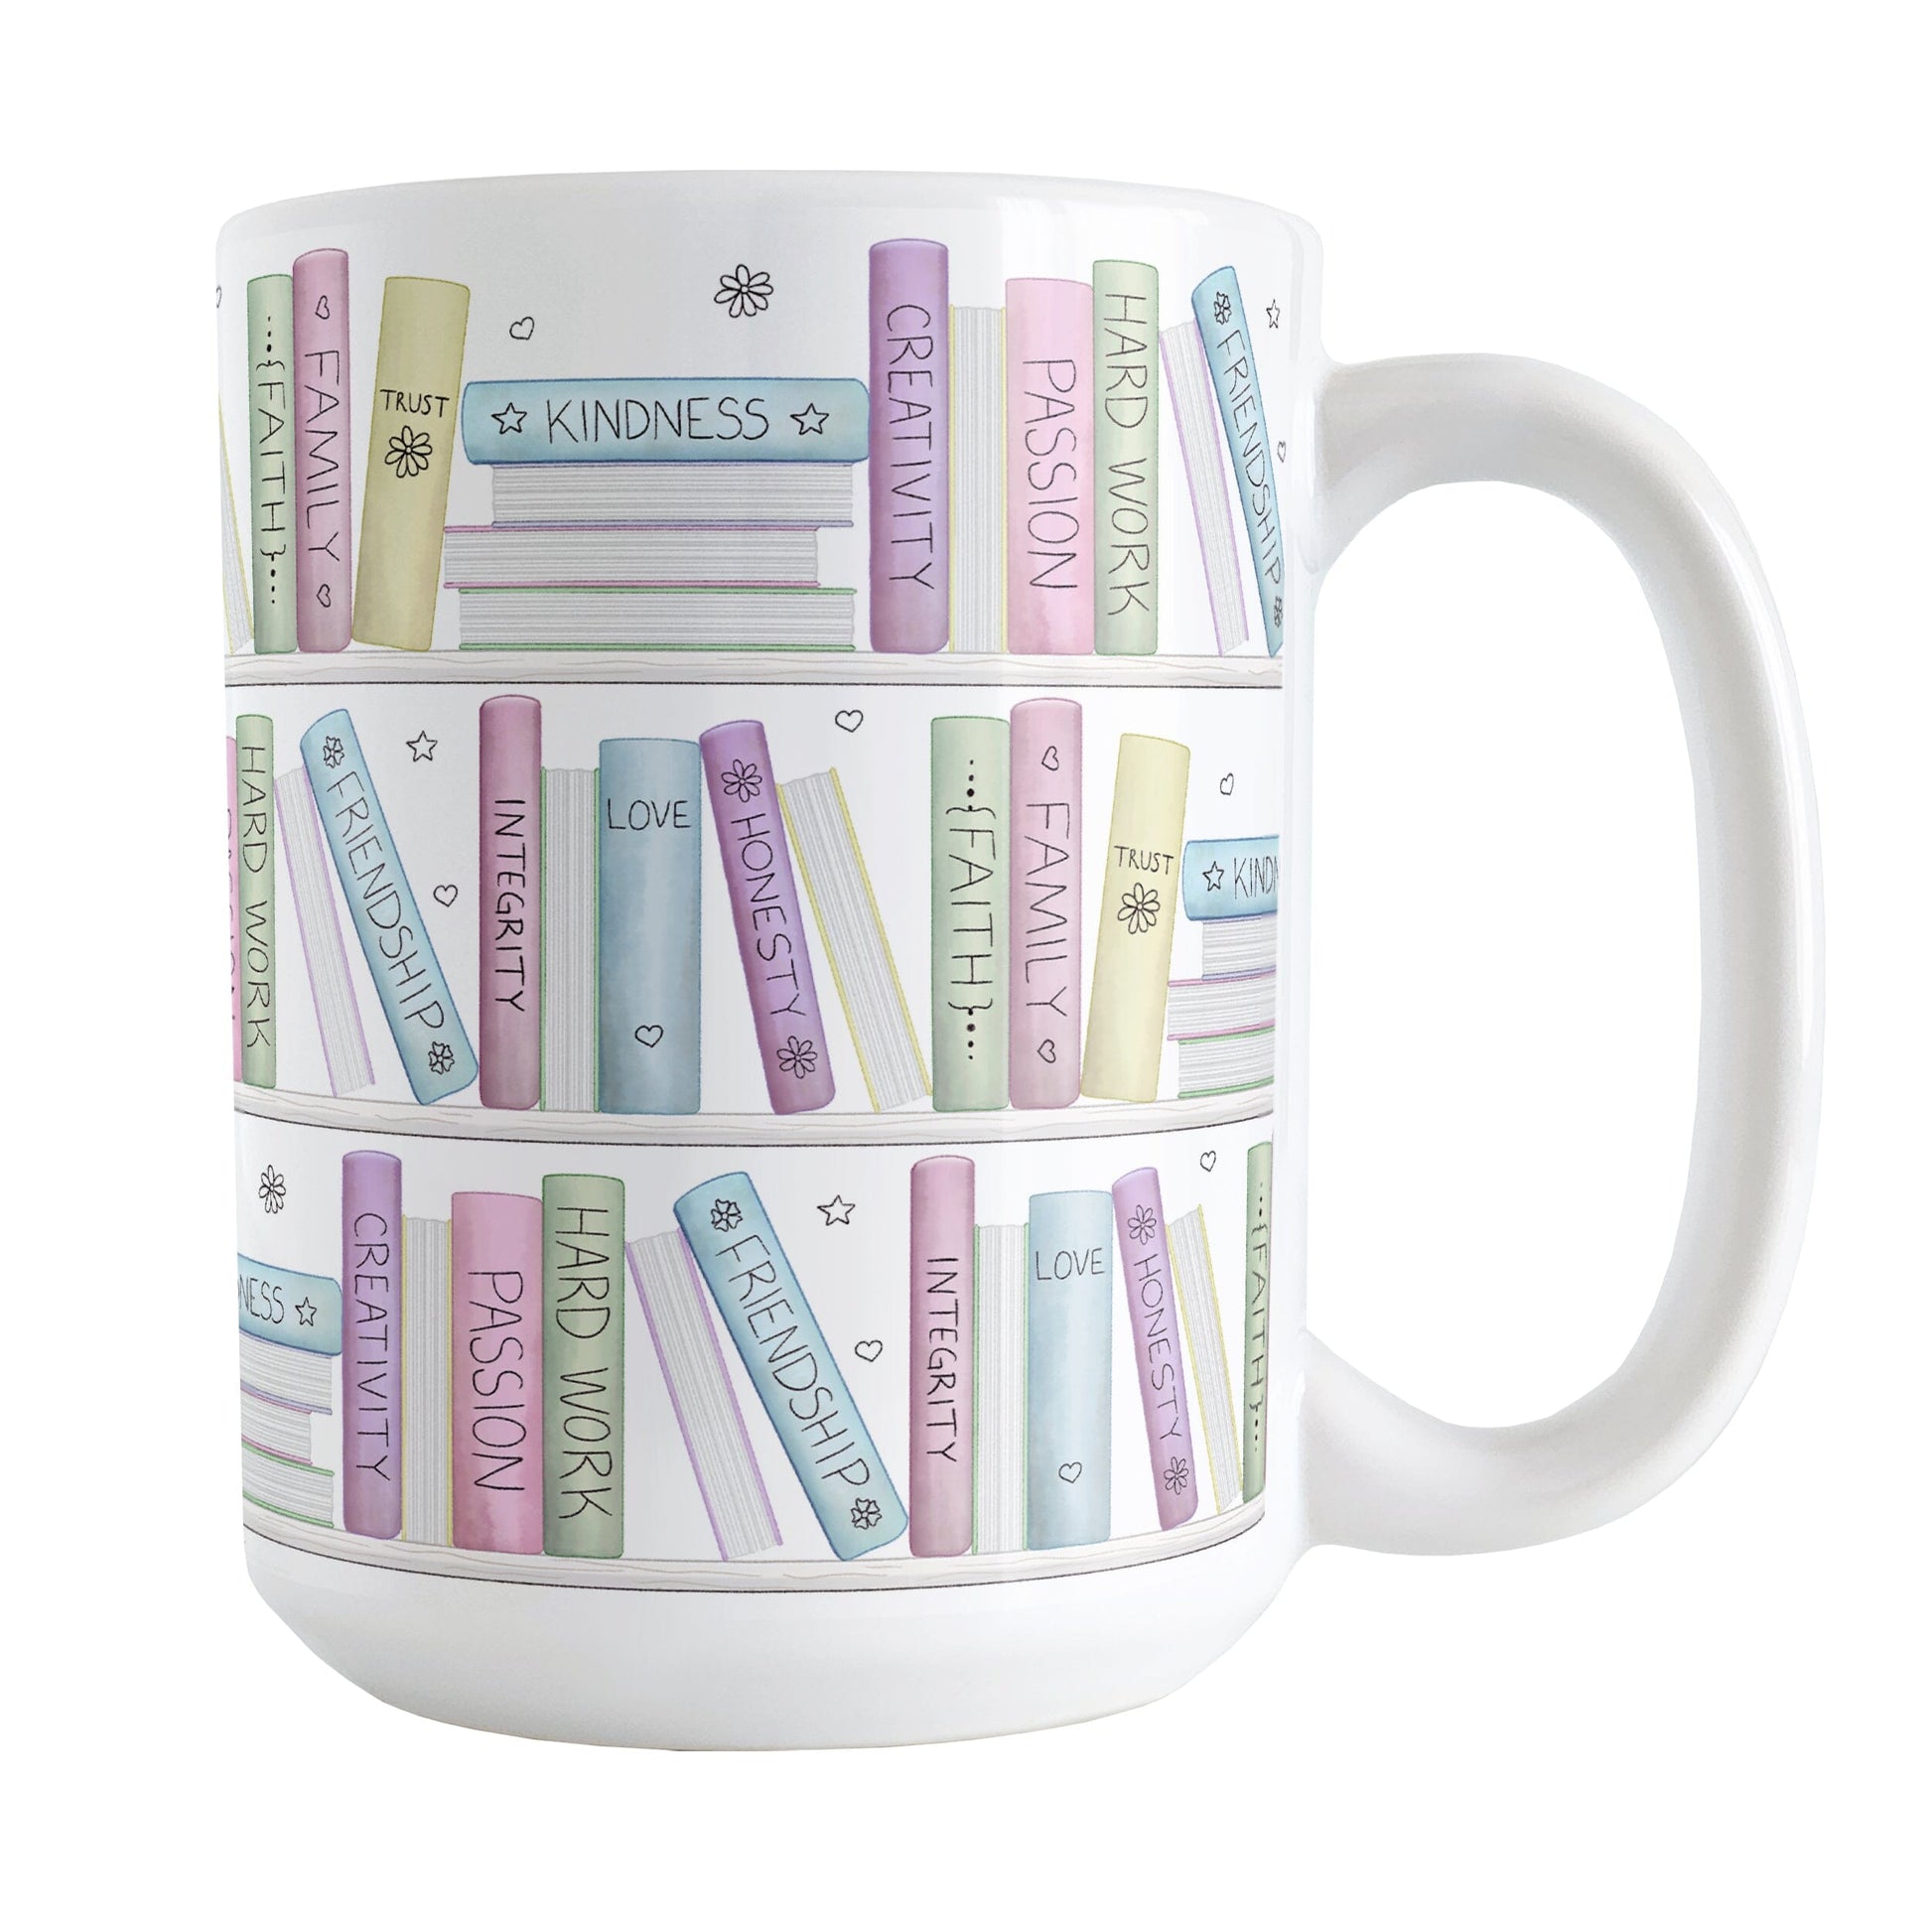 The Building Books of Life Mug (15oz) at Amy's Coffee Mugs. A ceramic coffee mug designed with a colorful pattern of books on a bookshelf each with an inspirational title that all could be considered important building blocks of life, such as love, family, integrity, kindness, passion, faith, creativity, and more. 